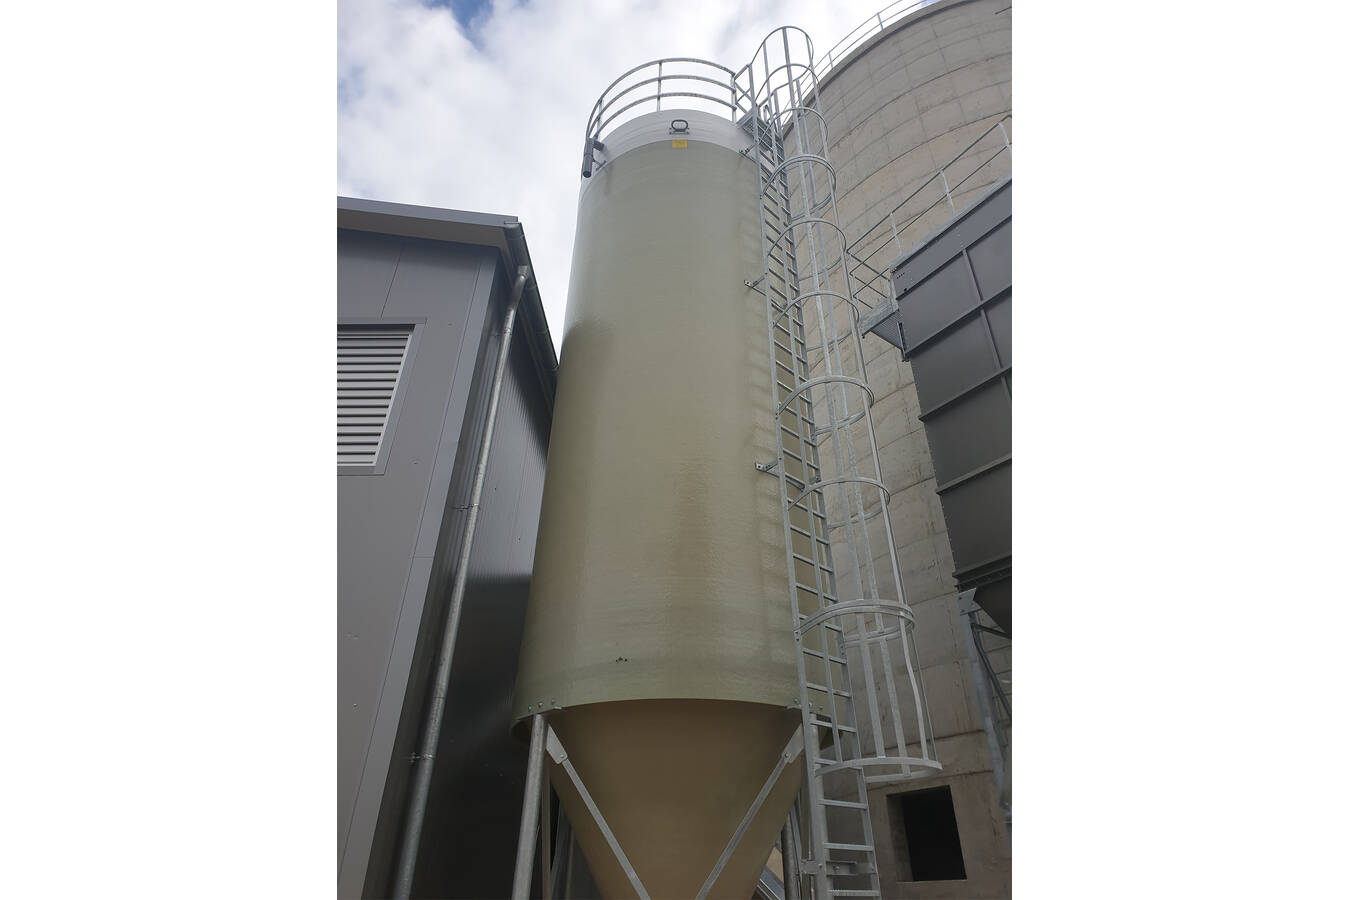 Composite silo for starch with safety measures Rupture discs, stainless steel strips, overpressure valve 